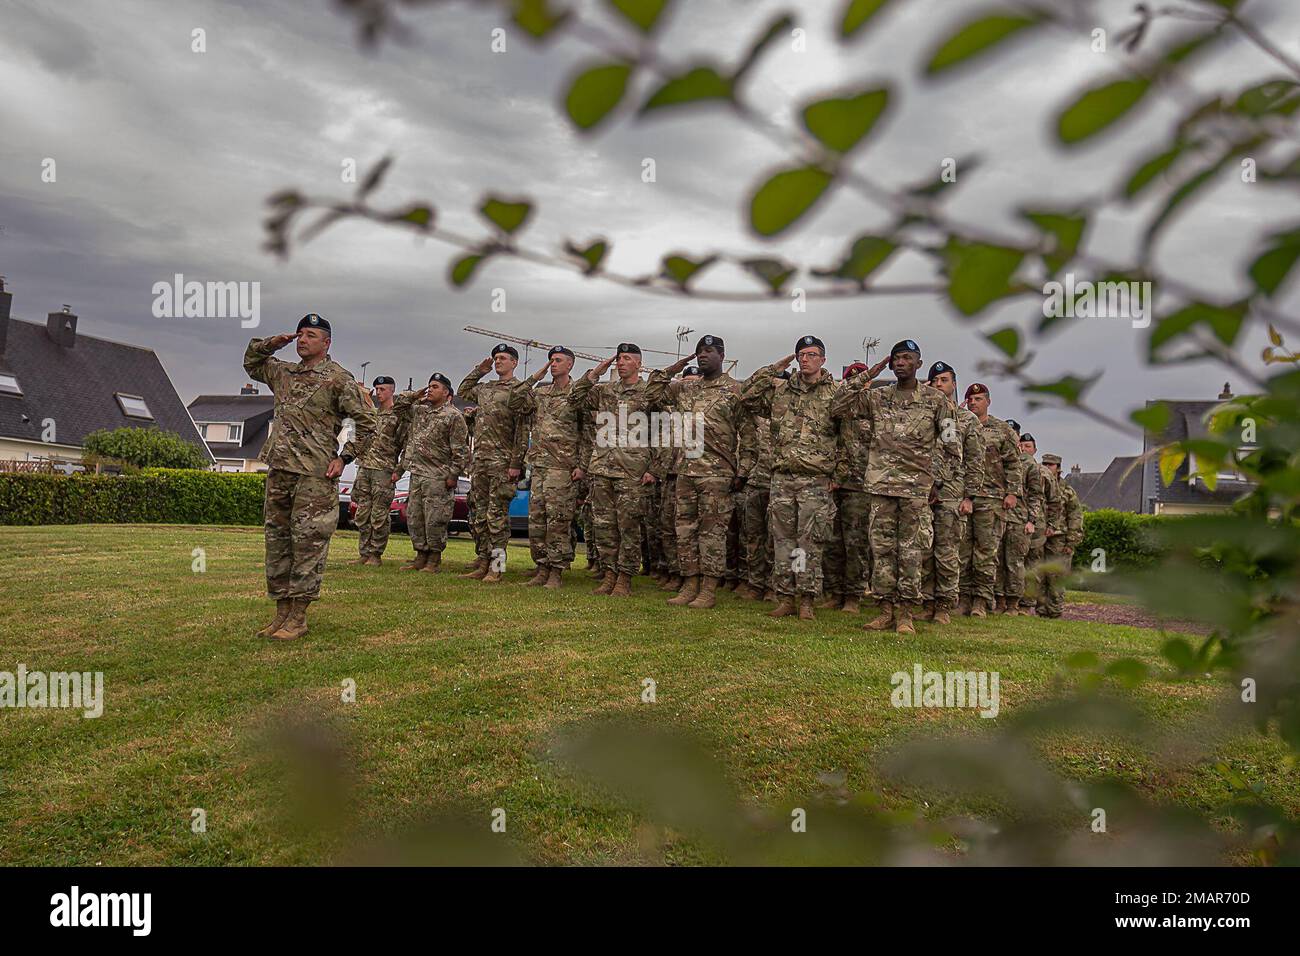 U.S. Army Soldiers render a salute, June 3, 2022, during the D-Day 78th Anniversary Events, at Montebourg, Normandie, France. Soldiers rendered salute to National Anthems of the United Kingdom, Germany, United States of America and France.Together, the US and our indispensable European allies are demonstrating the strength of alliance and dedicated resolve borne out of D-Day 78 years ago and forged over almost eight decades of combat-credible cooperative security. Stock Photo